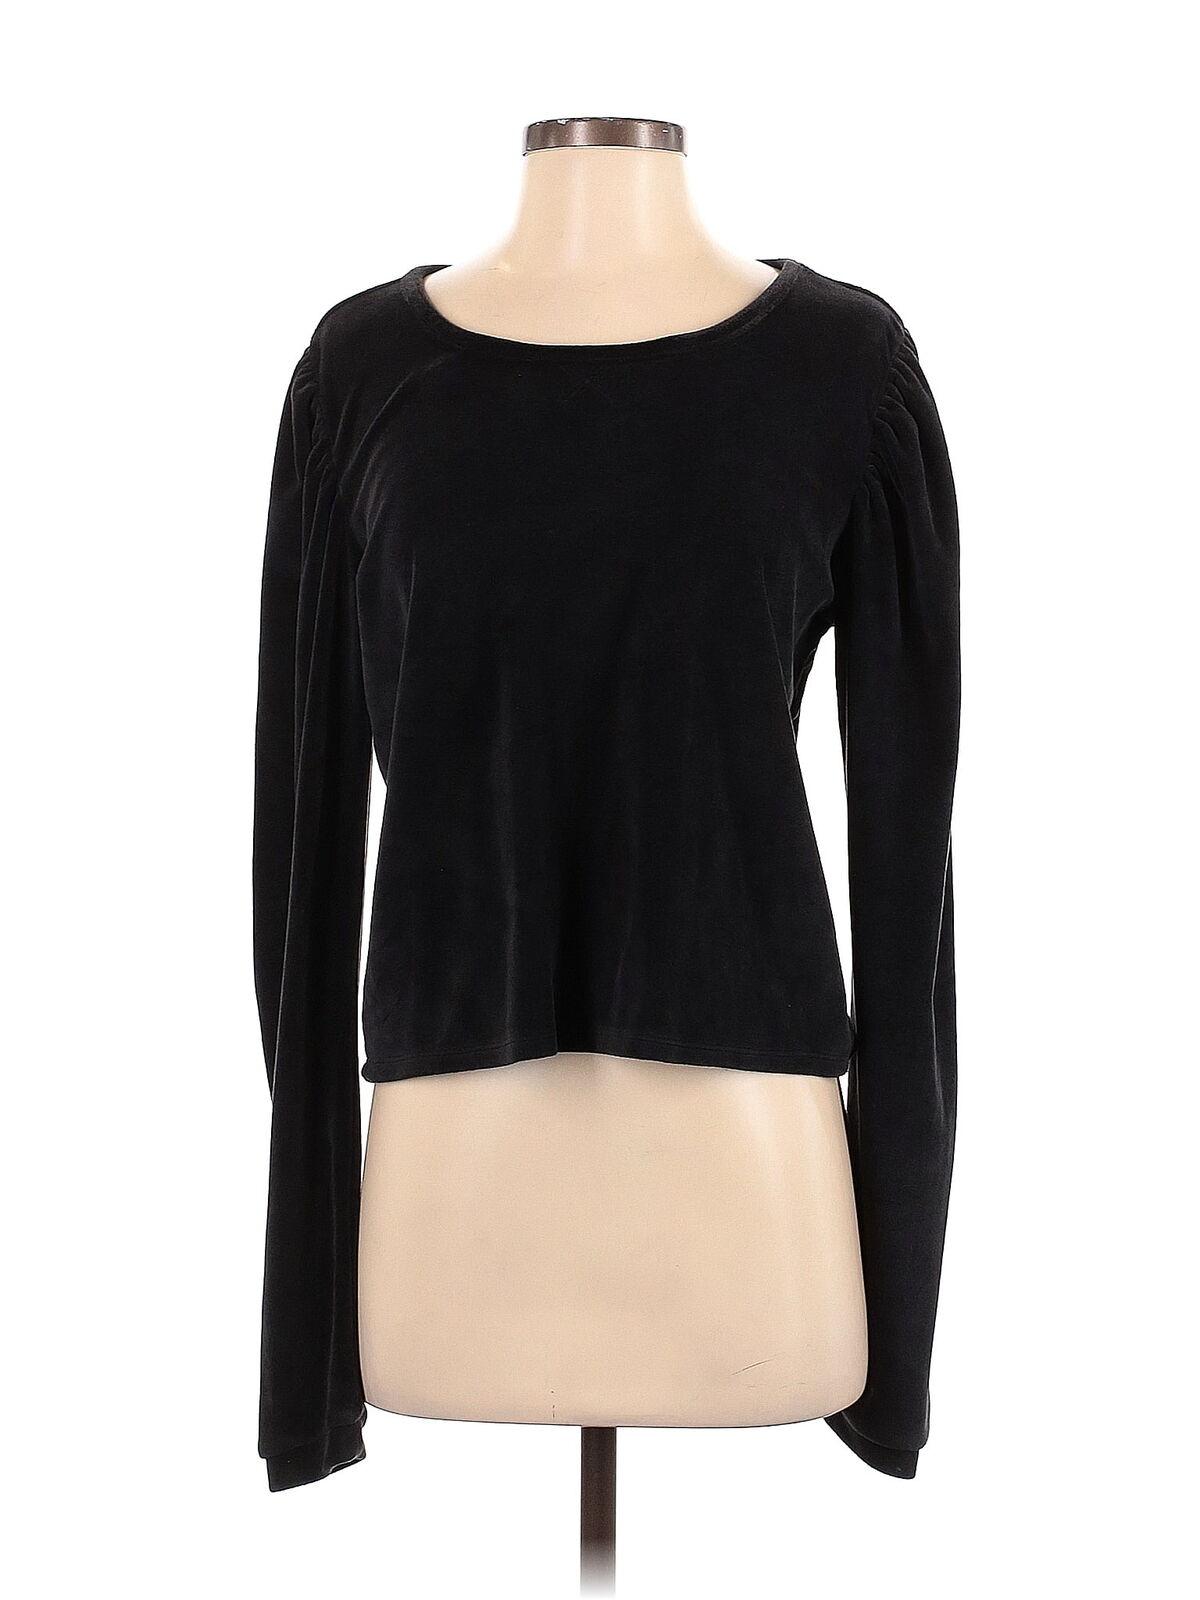 Rachel Parcell Women Black Pullover Sweater S - image 1